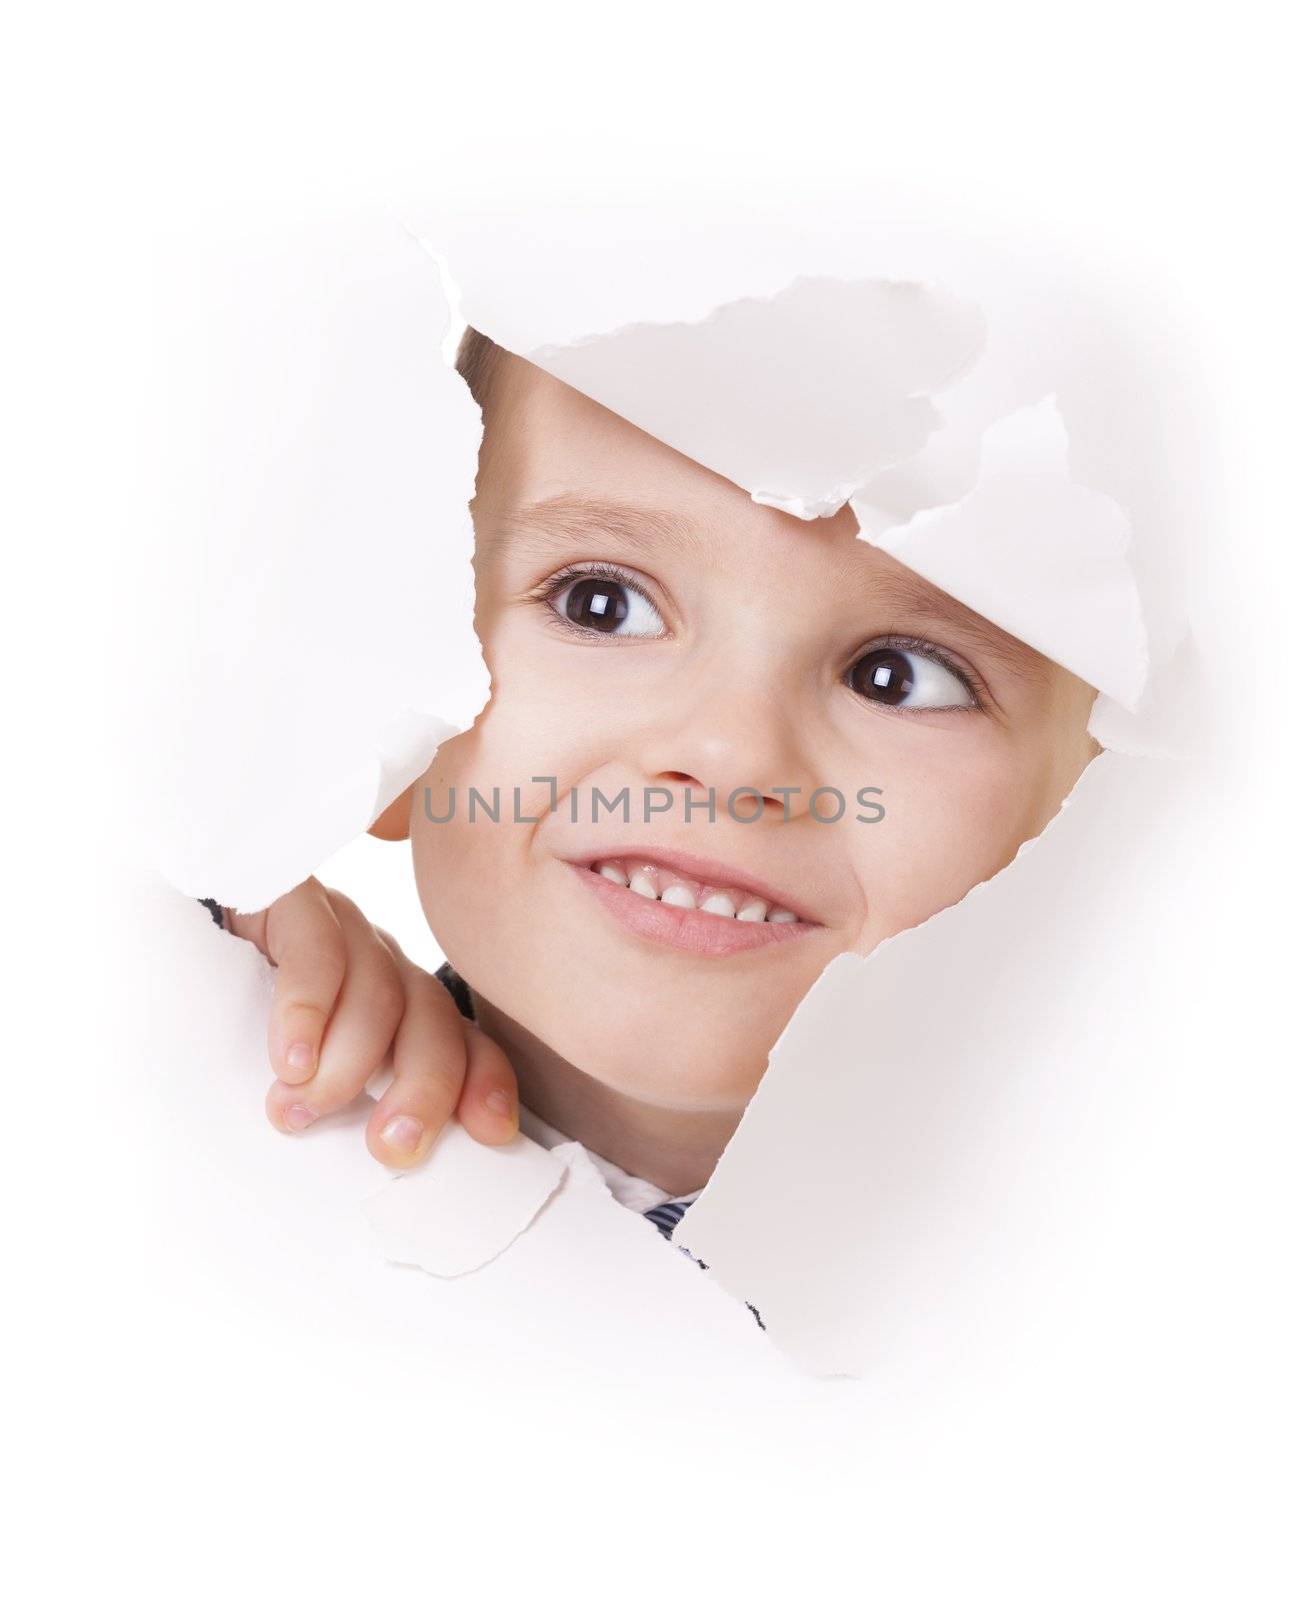 Curious kid looks through a hole in white paper by iryna_rasko